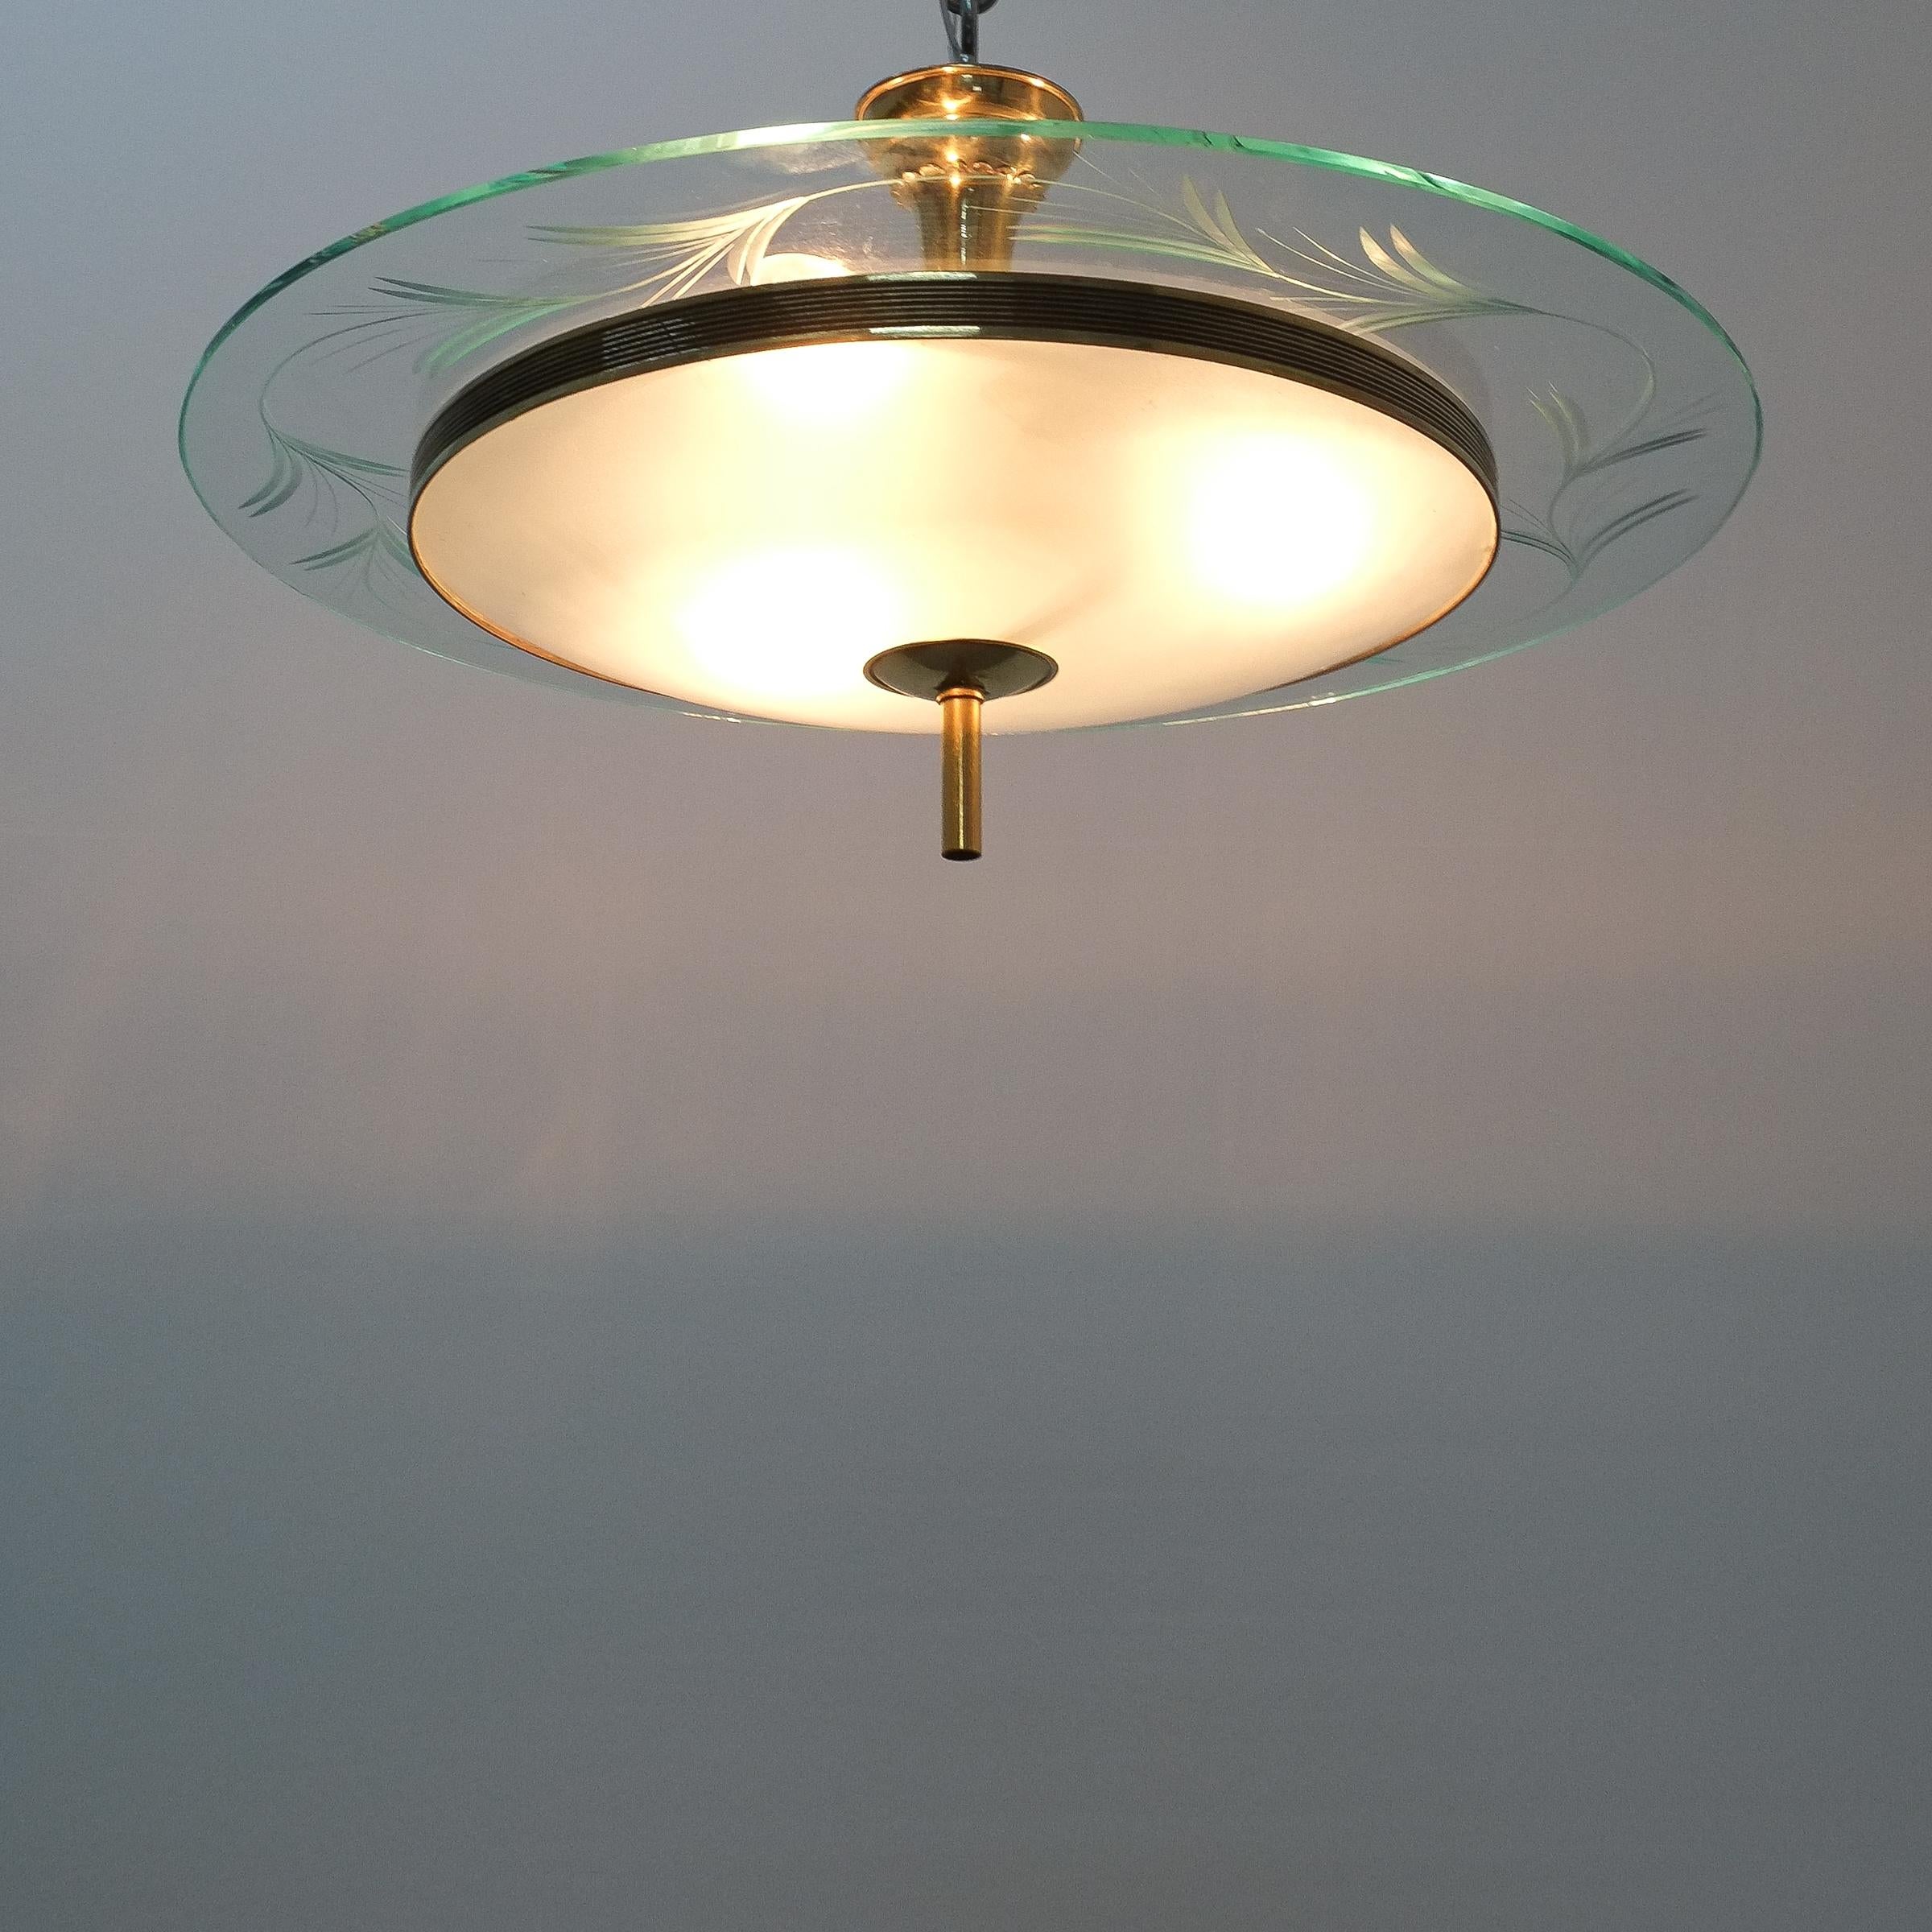 Semi flush mount attributed to Luigi Brusotti, circa 1945, Italy. Beautifully preserved ceiling lampmount with a 19.5